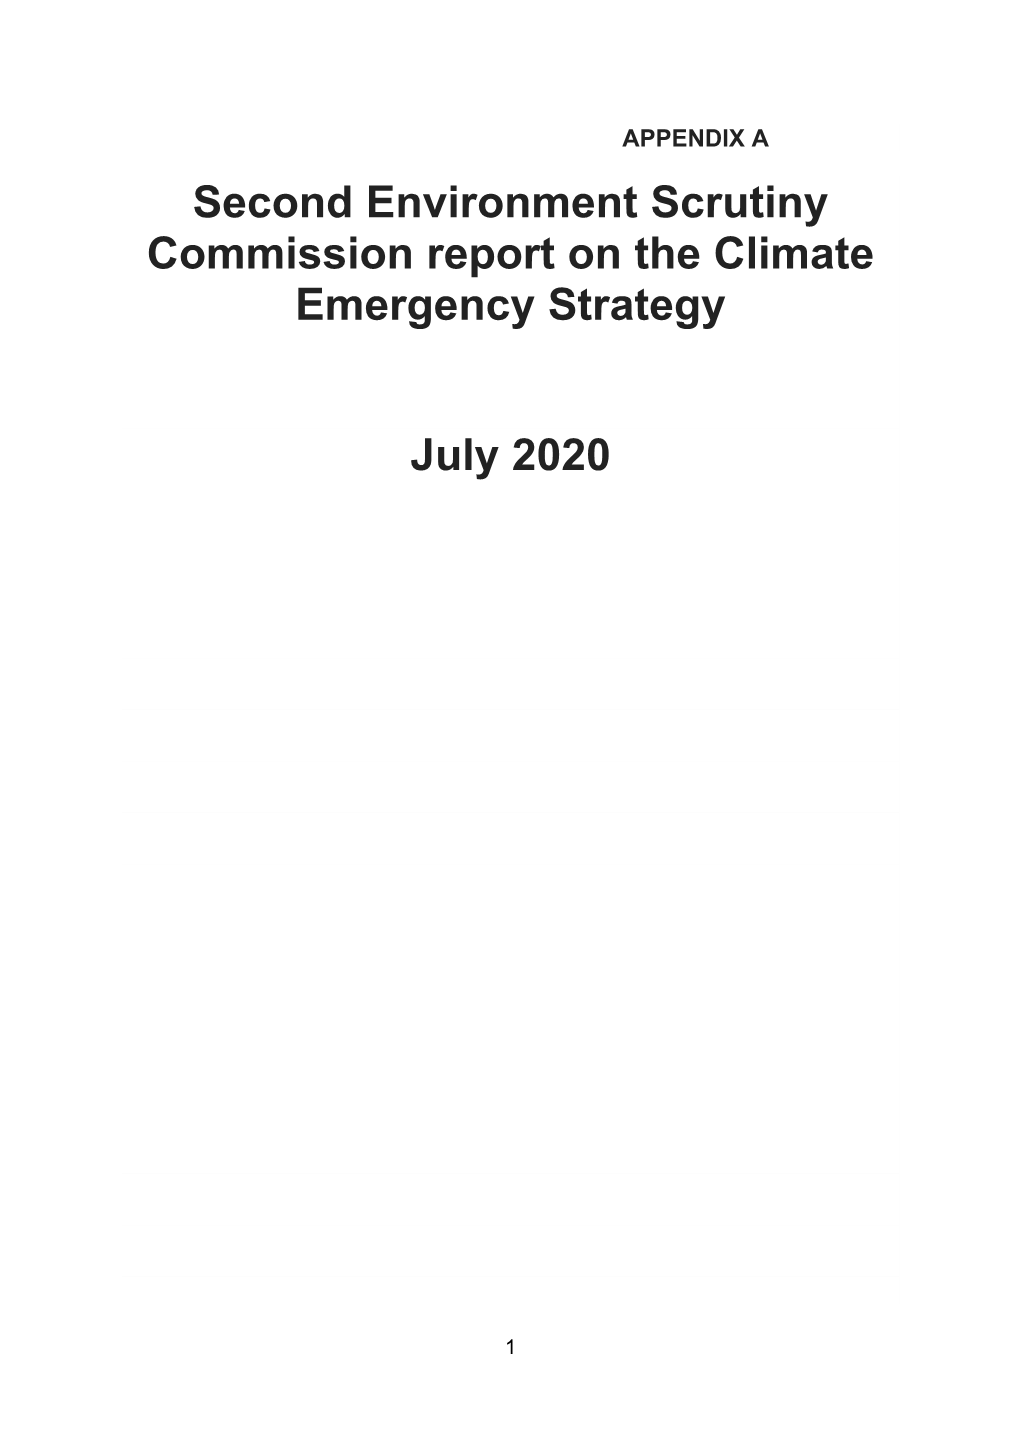 Second Environment Scrutiny Commission Report on the Climate Emergency Strategy July 2020